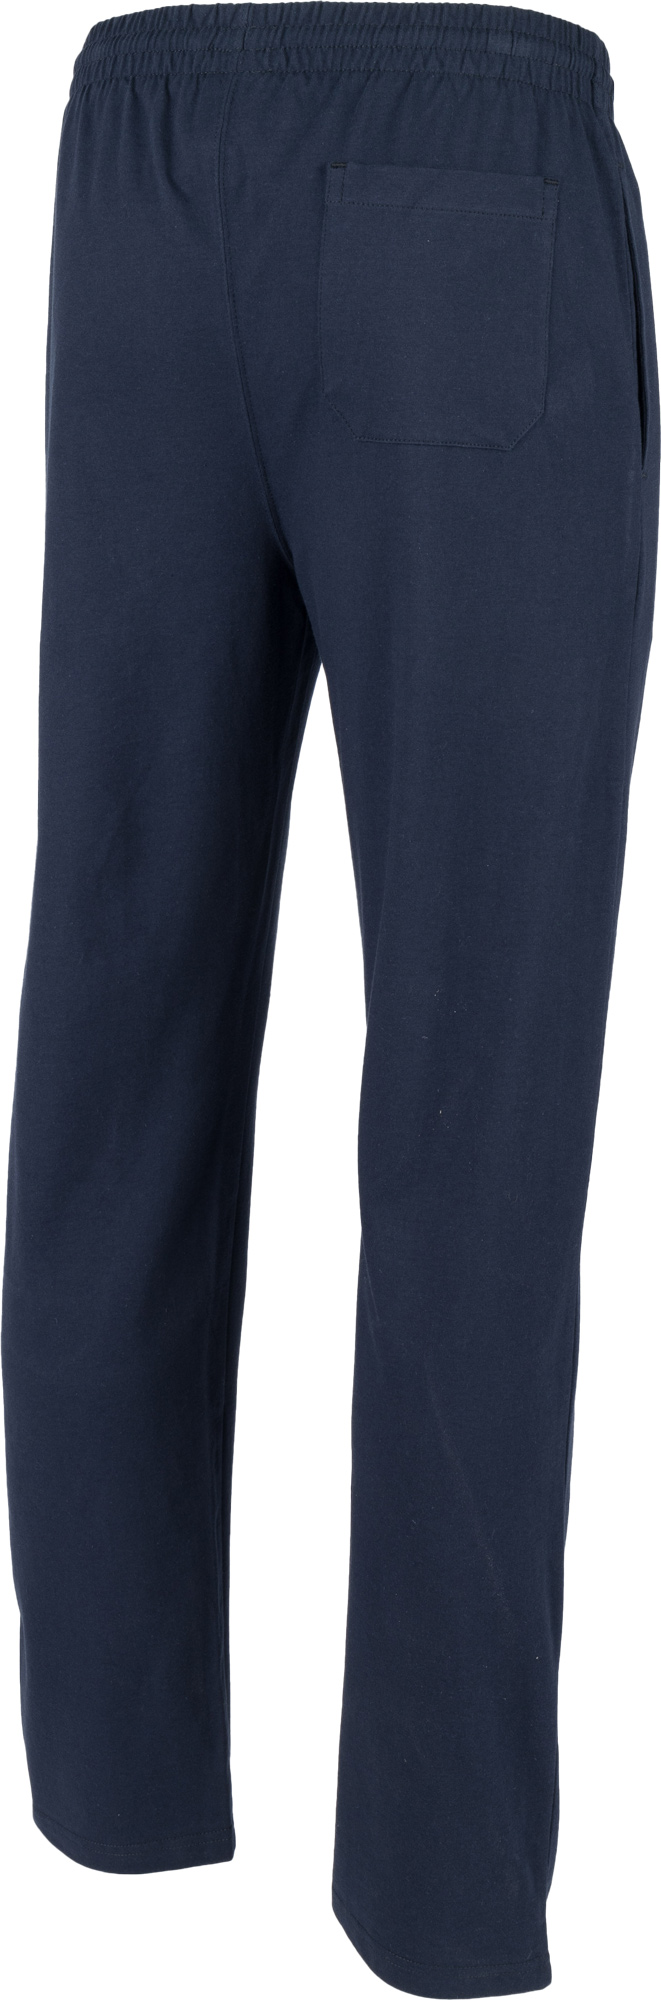 Russell Athletic OPEN LEG PANT | sportisimo.com